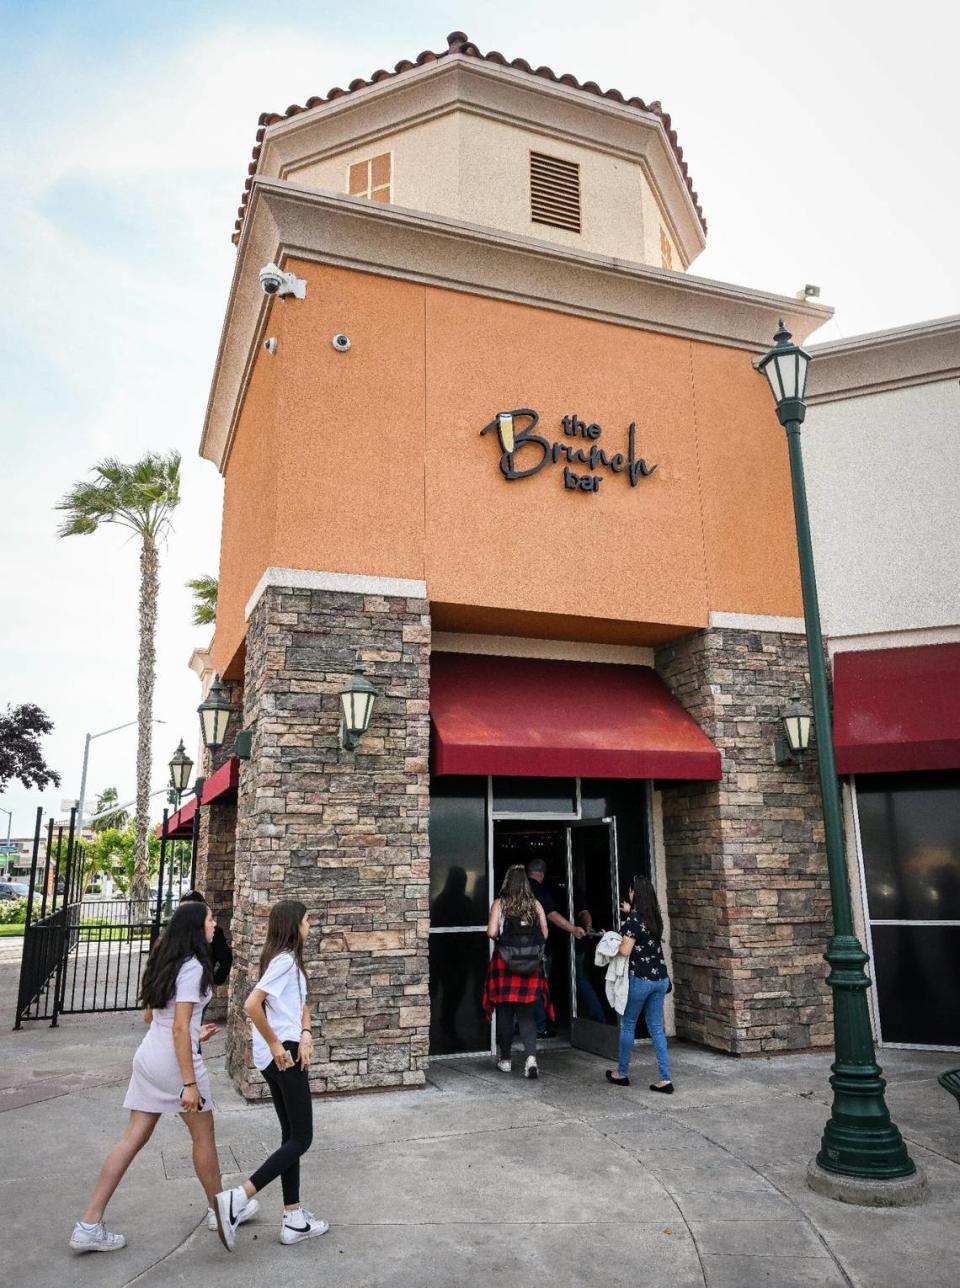 The Brunch Bar is taking over the former Chronic Tacos space in the Clovis Commons shopping center at Willow and Herndon avenues in Clovis.